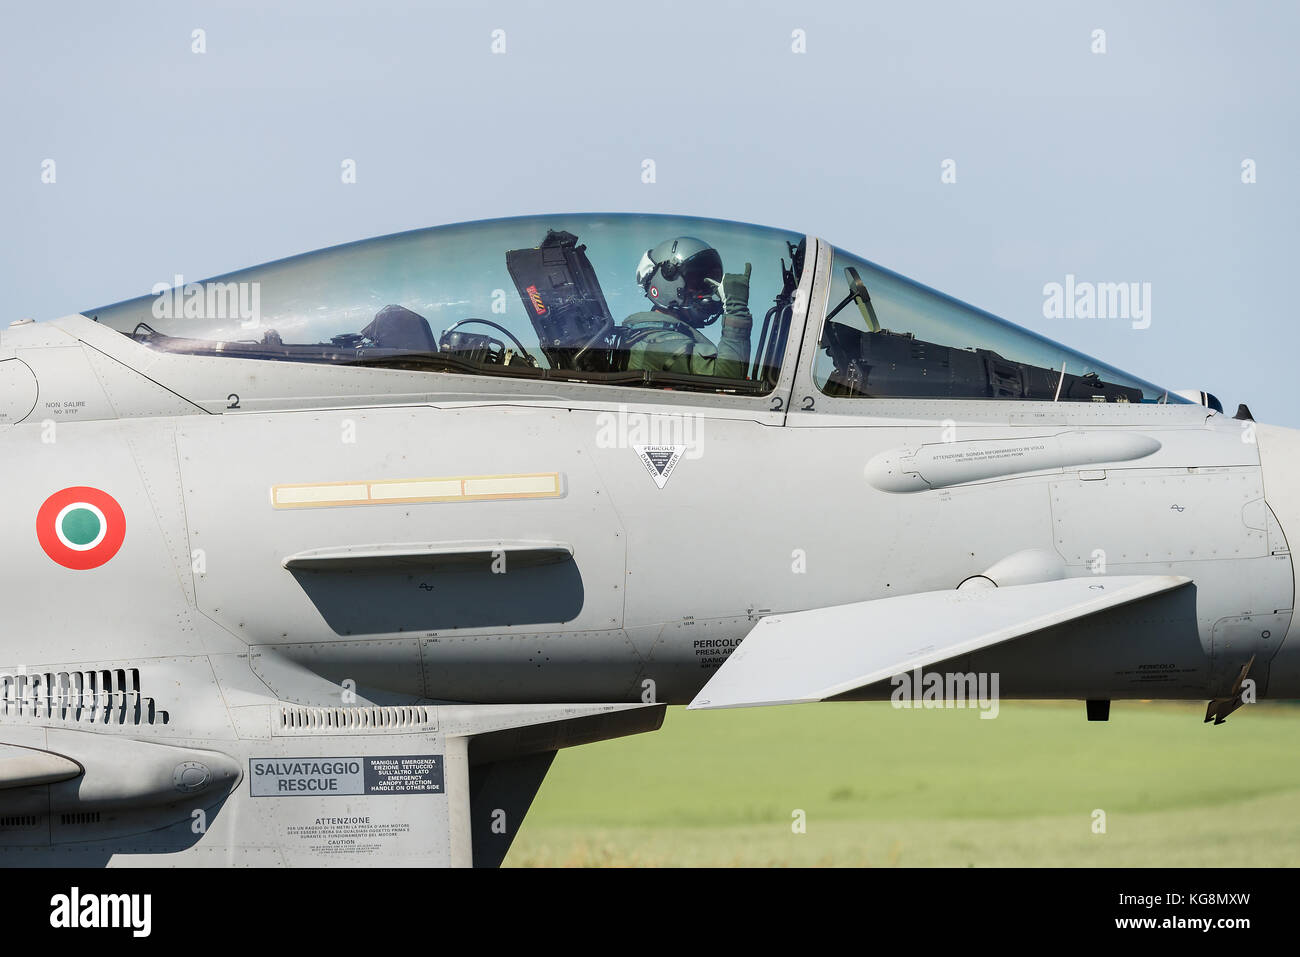 A Eurofighter Typhoon fighter jet of the 4º Stormo squadron of the Italian Air Force. Stock Photo